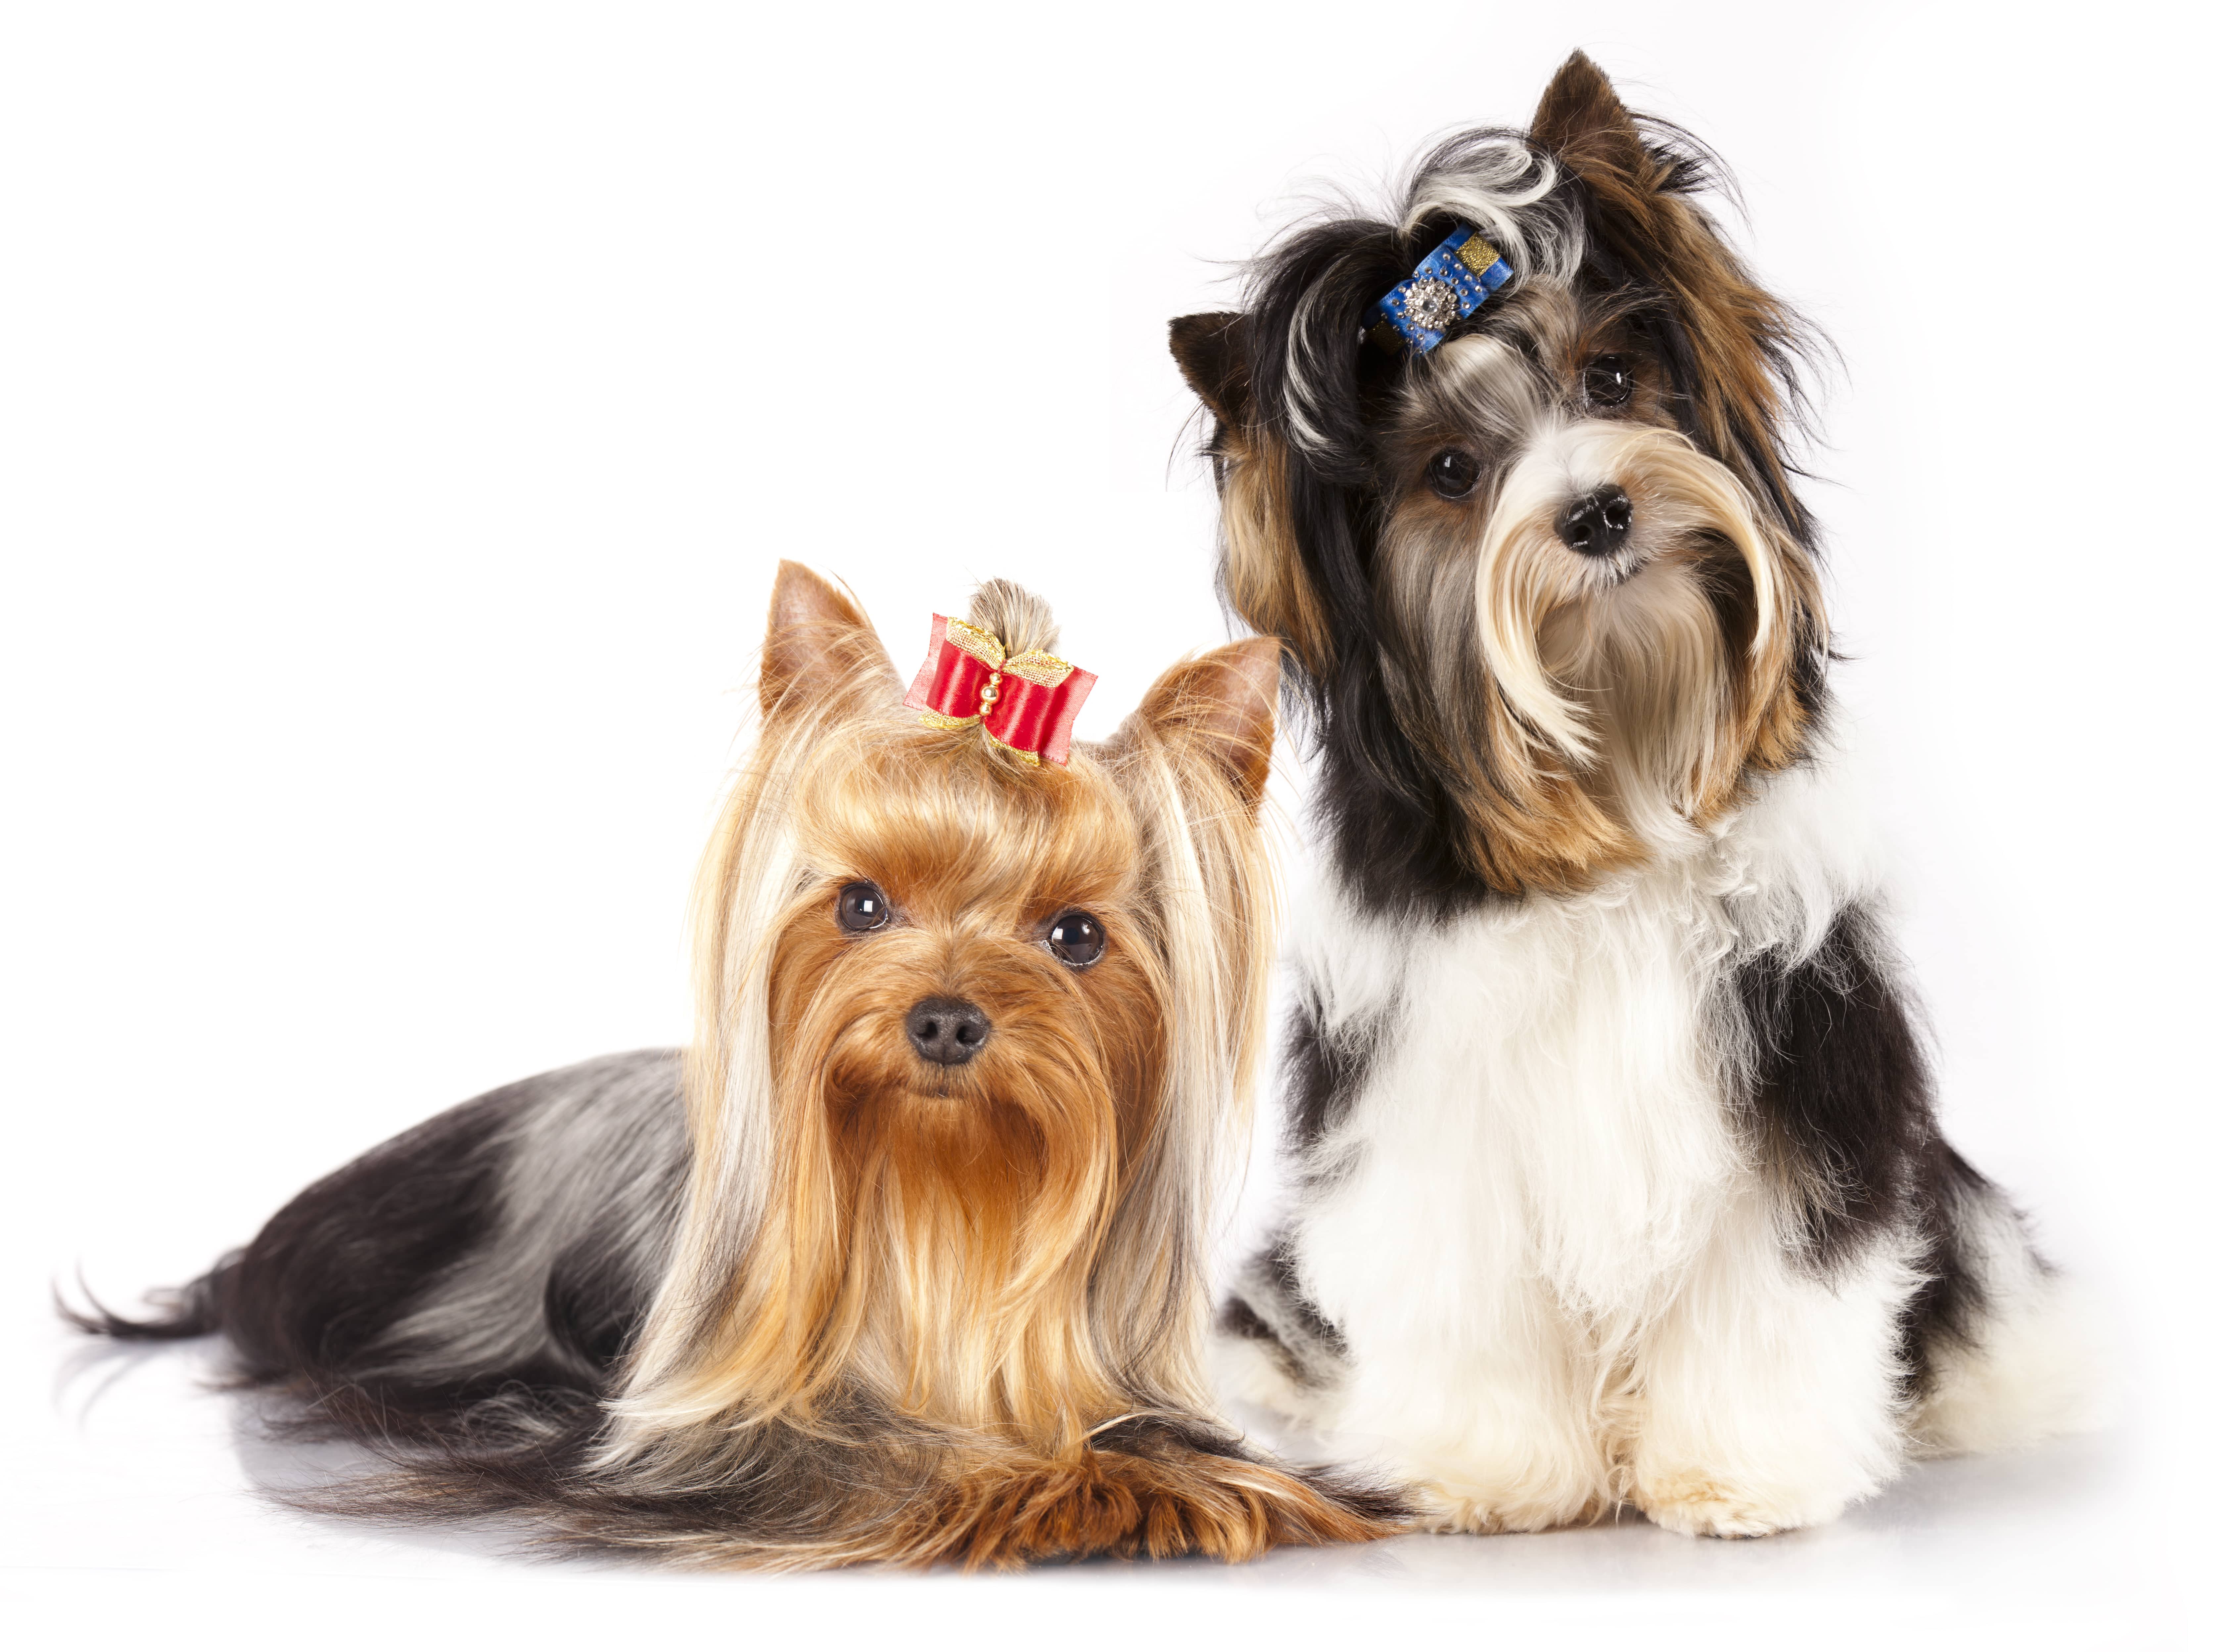 Yorkshire Terrier grooming - everything you need to know | DIY Dog Grooming  Help